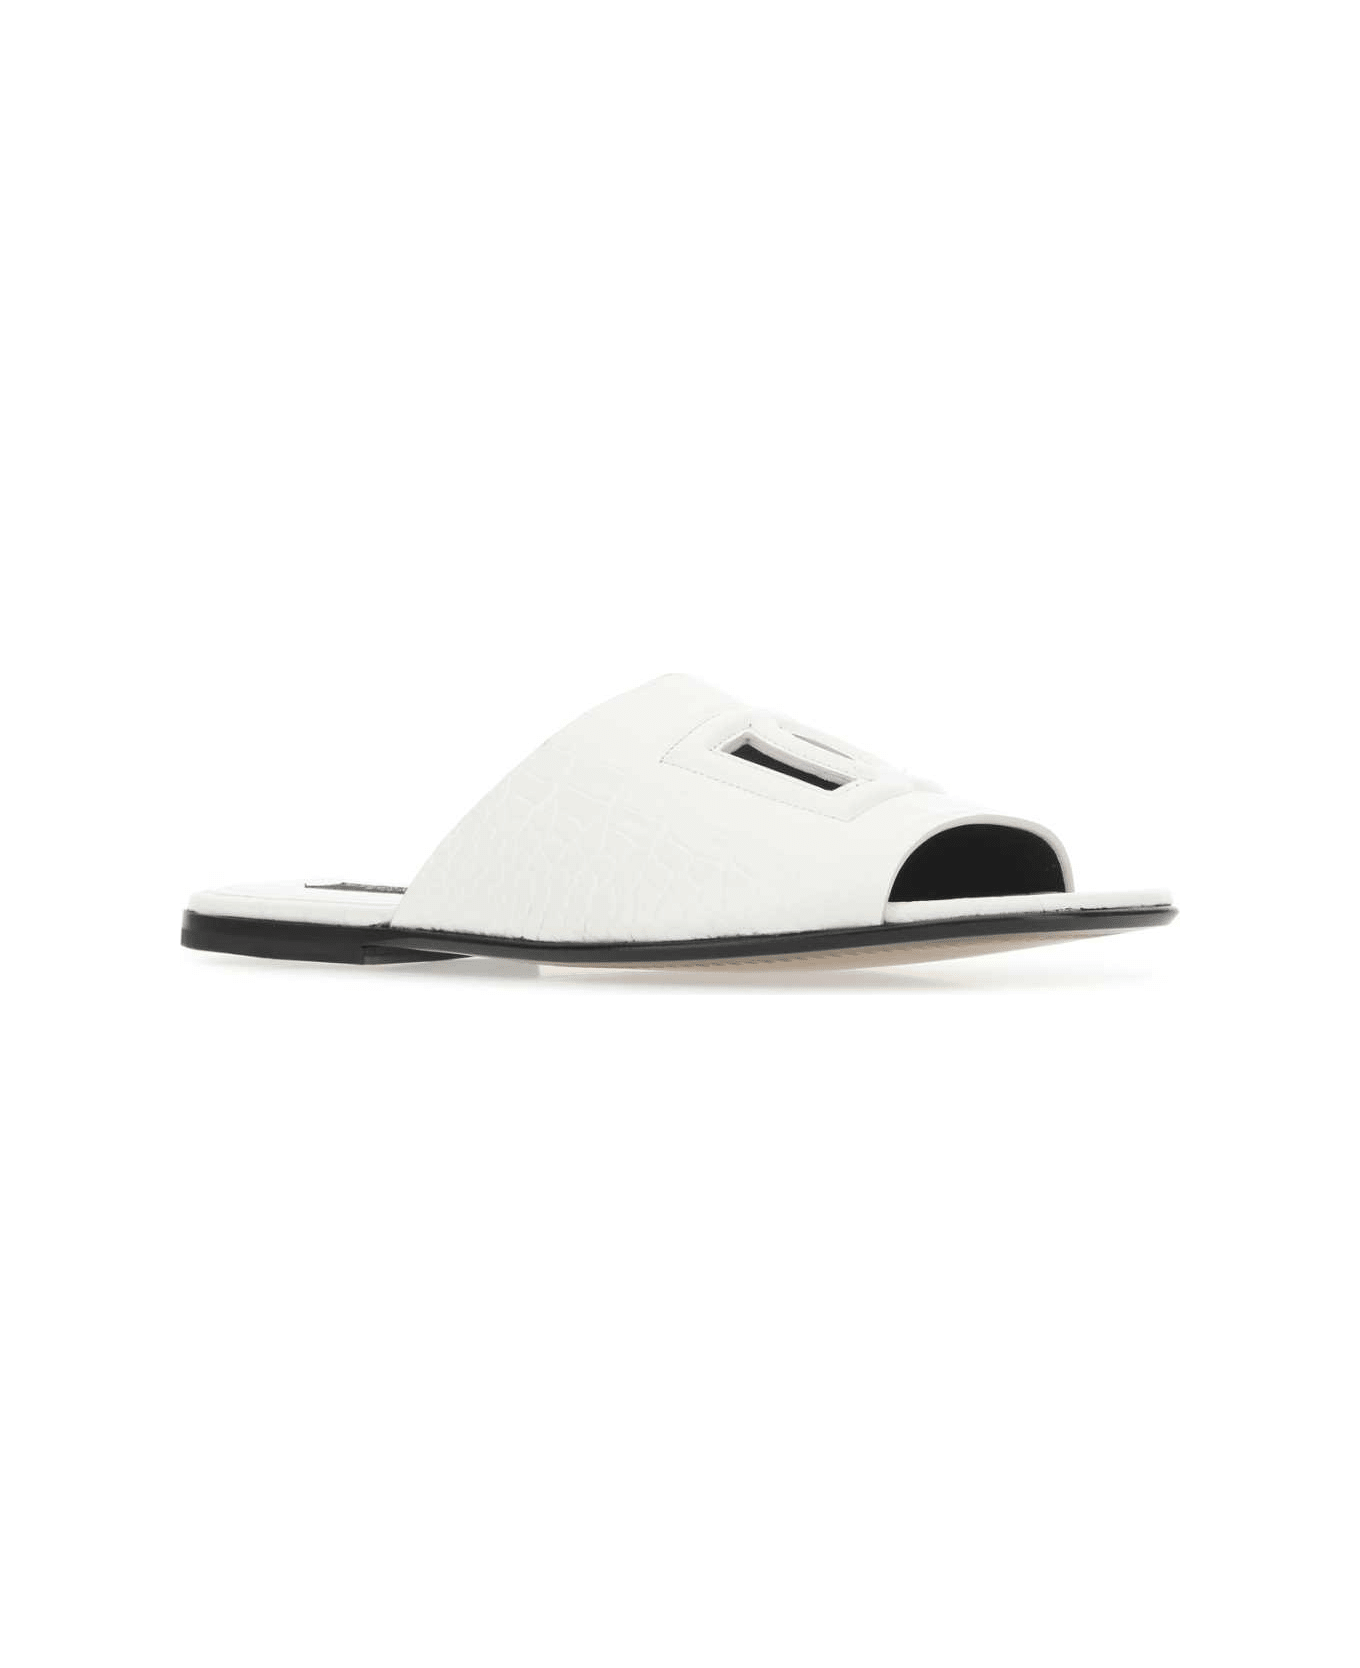 Dolce & Gabbana White Leather Slippers - 8H006